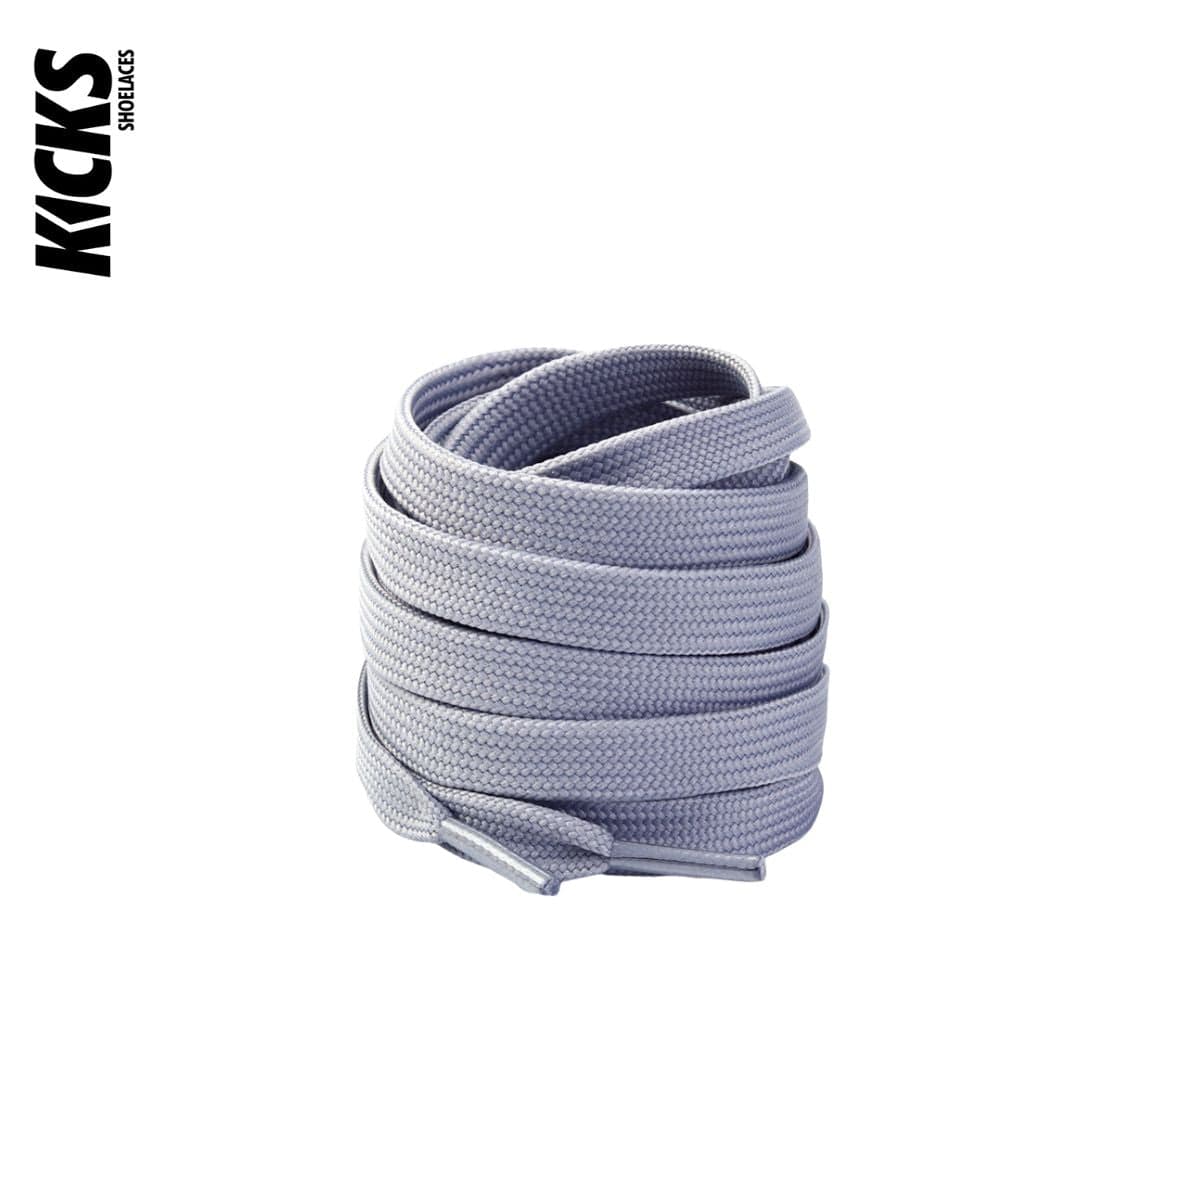 Grey Replacement Shoe Laces for Adidas NMD Sneakers by Kicks Shoelaces